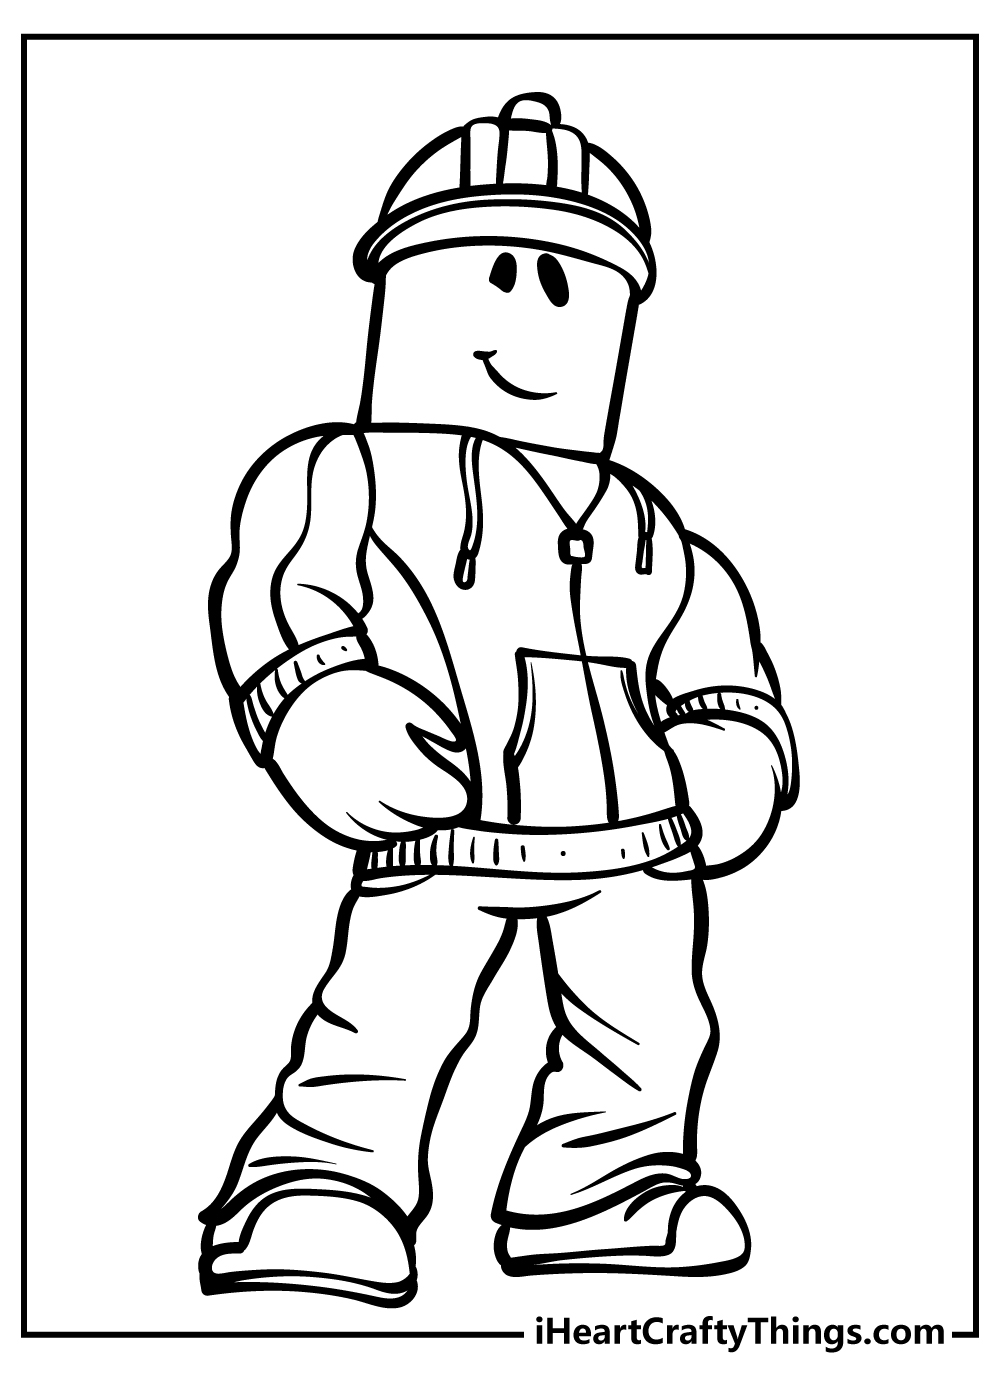 Roblox coloring pages free printable